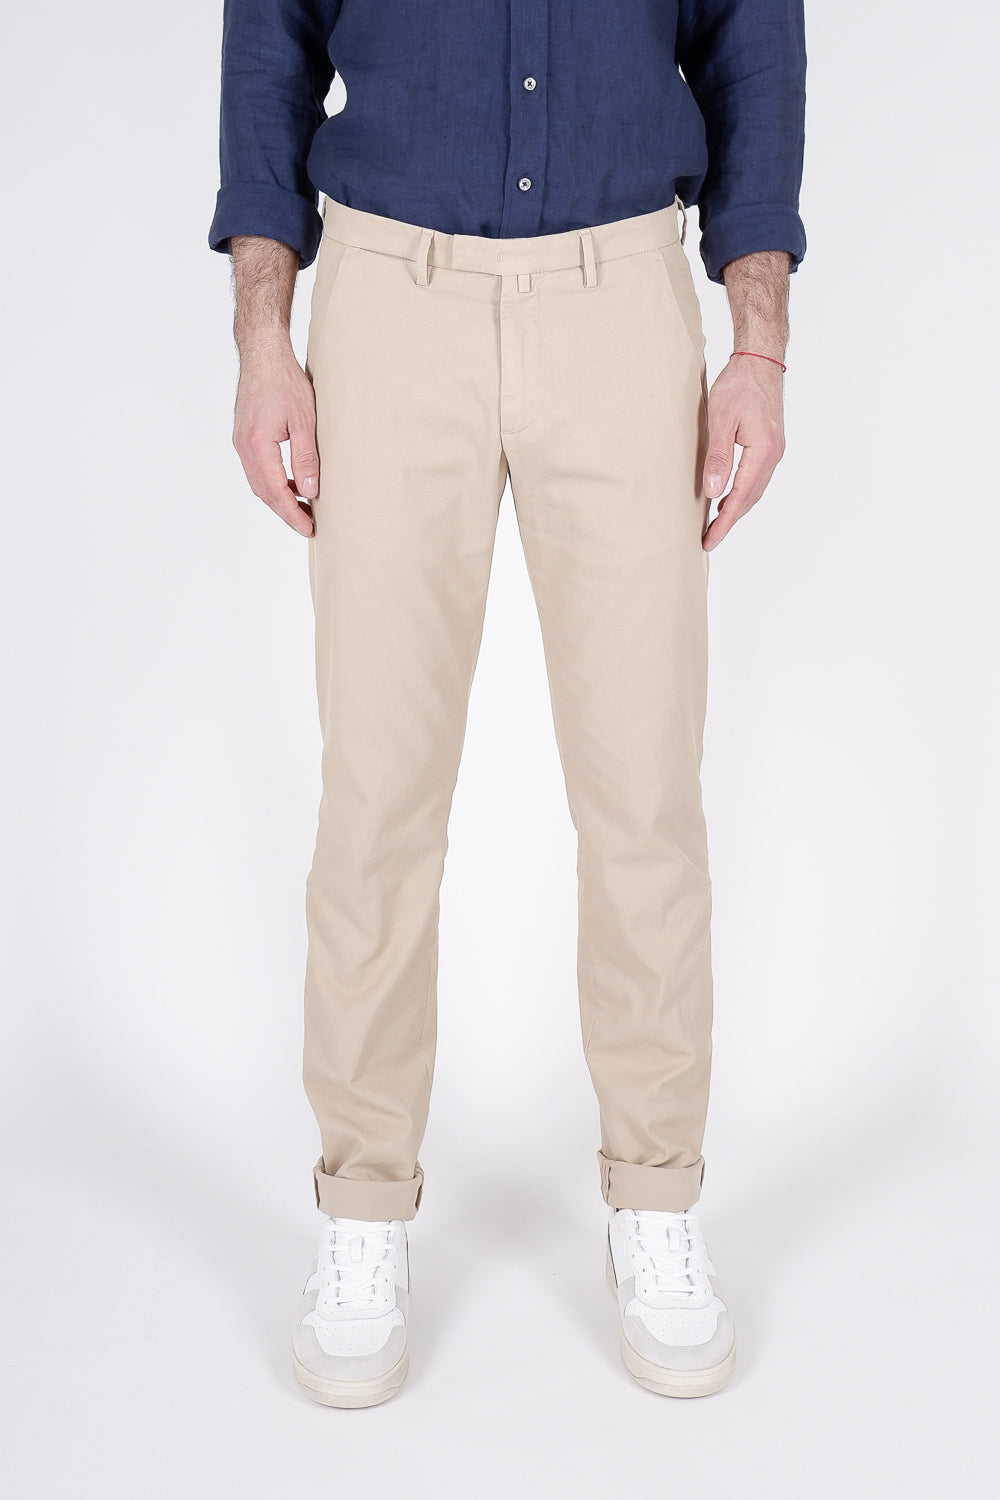 Buy the Briglia Italian Slim Fit Cotton Chino in Beige at Intro. Spend £50 for free UK delivery. Official stockists. We ship worldwide.